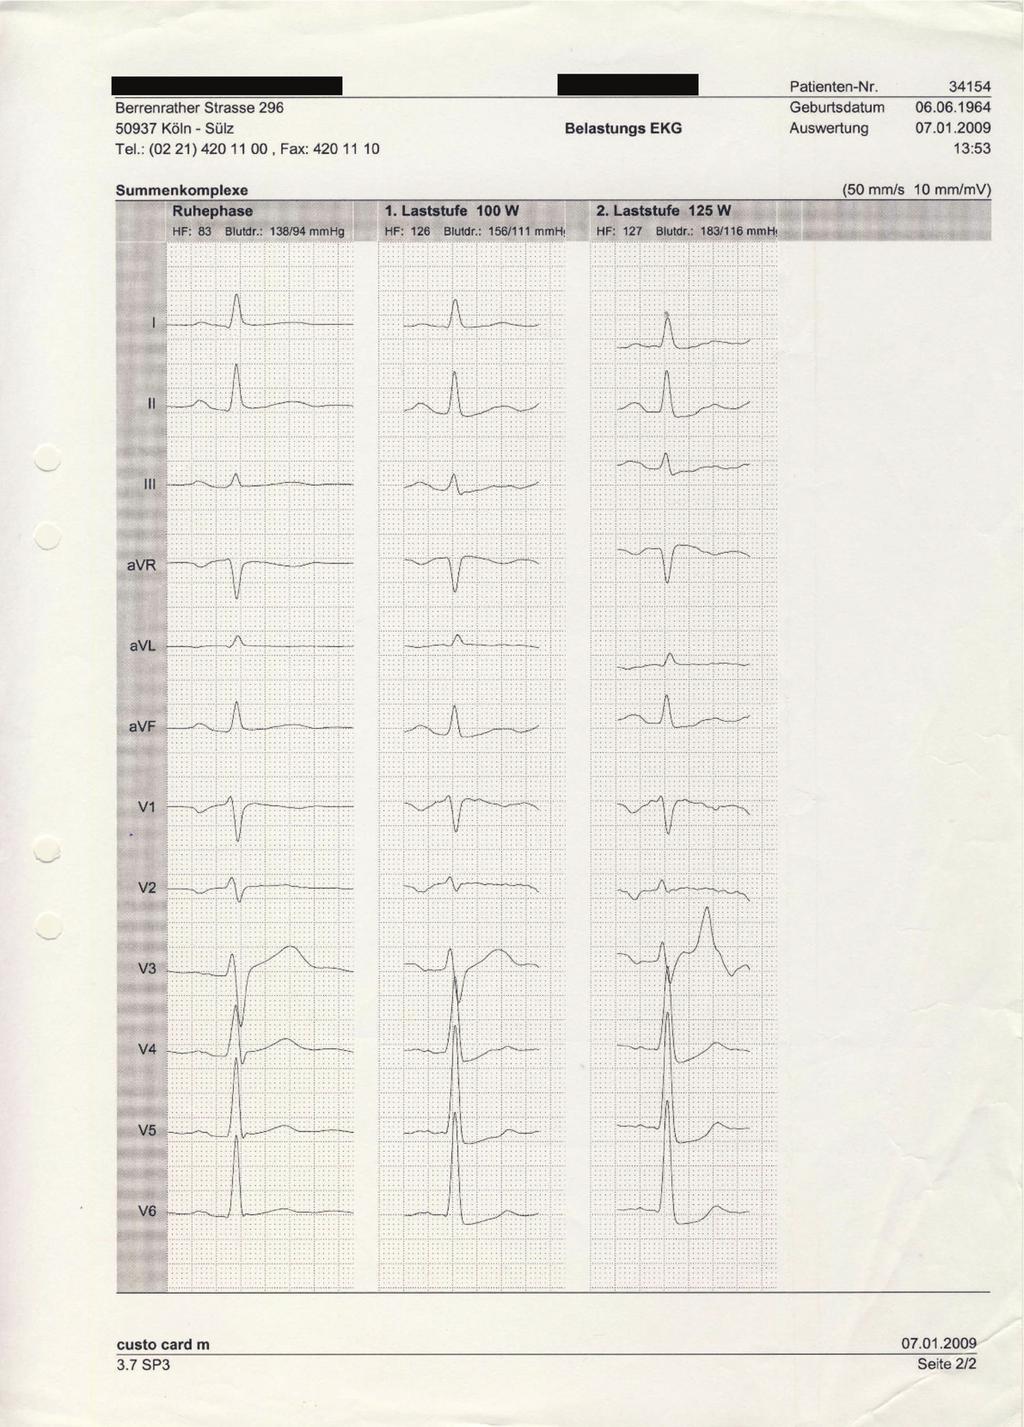 2 International Vascular Medicine Figure 1: 12-lead electrocardiogram demonstrating significant ST-depression in the posterior leads during exercise.